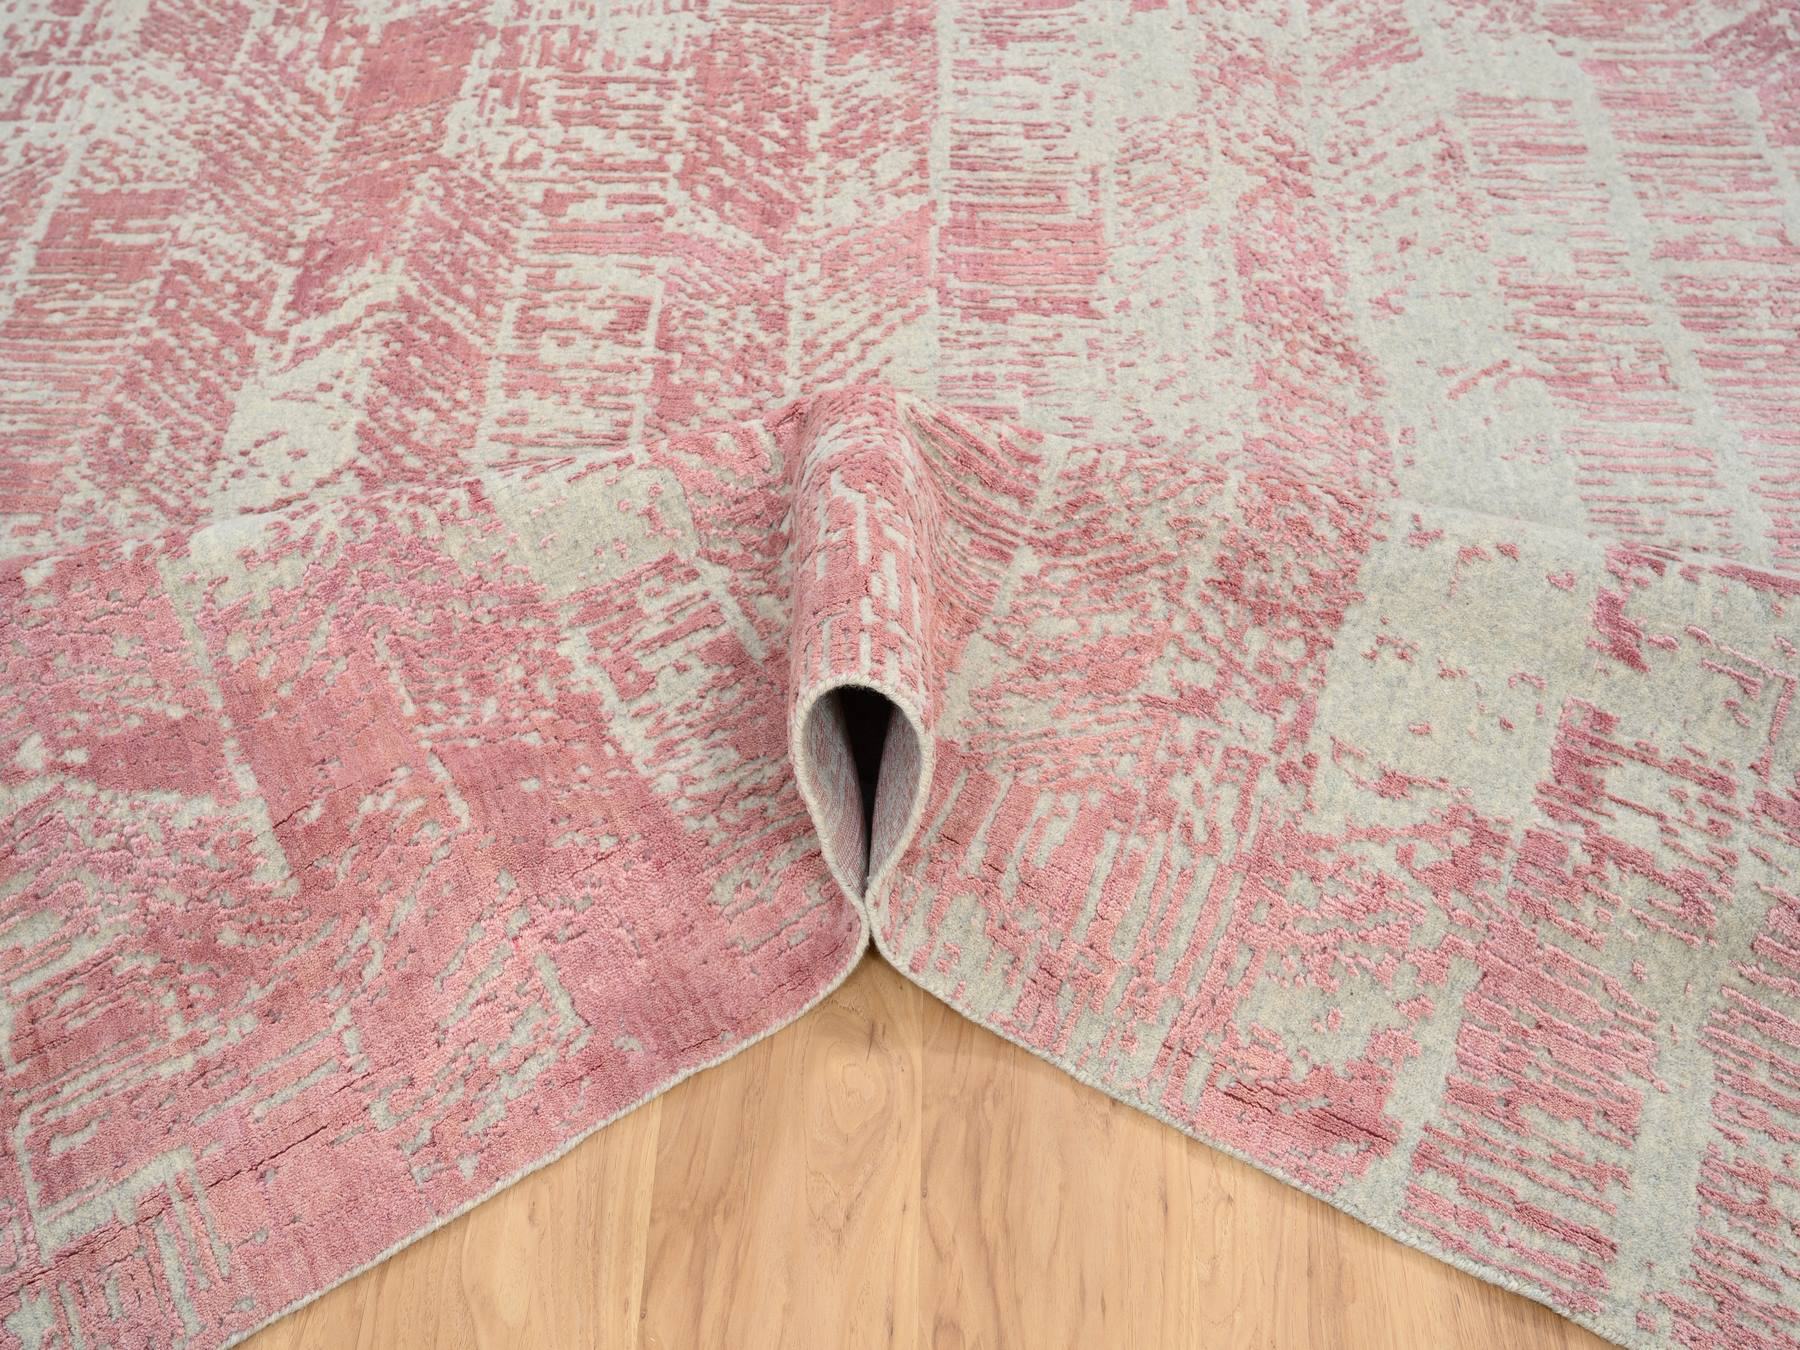 TransitionalRugs ORC583335